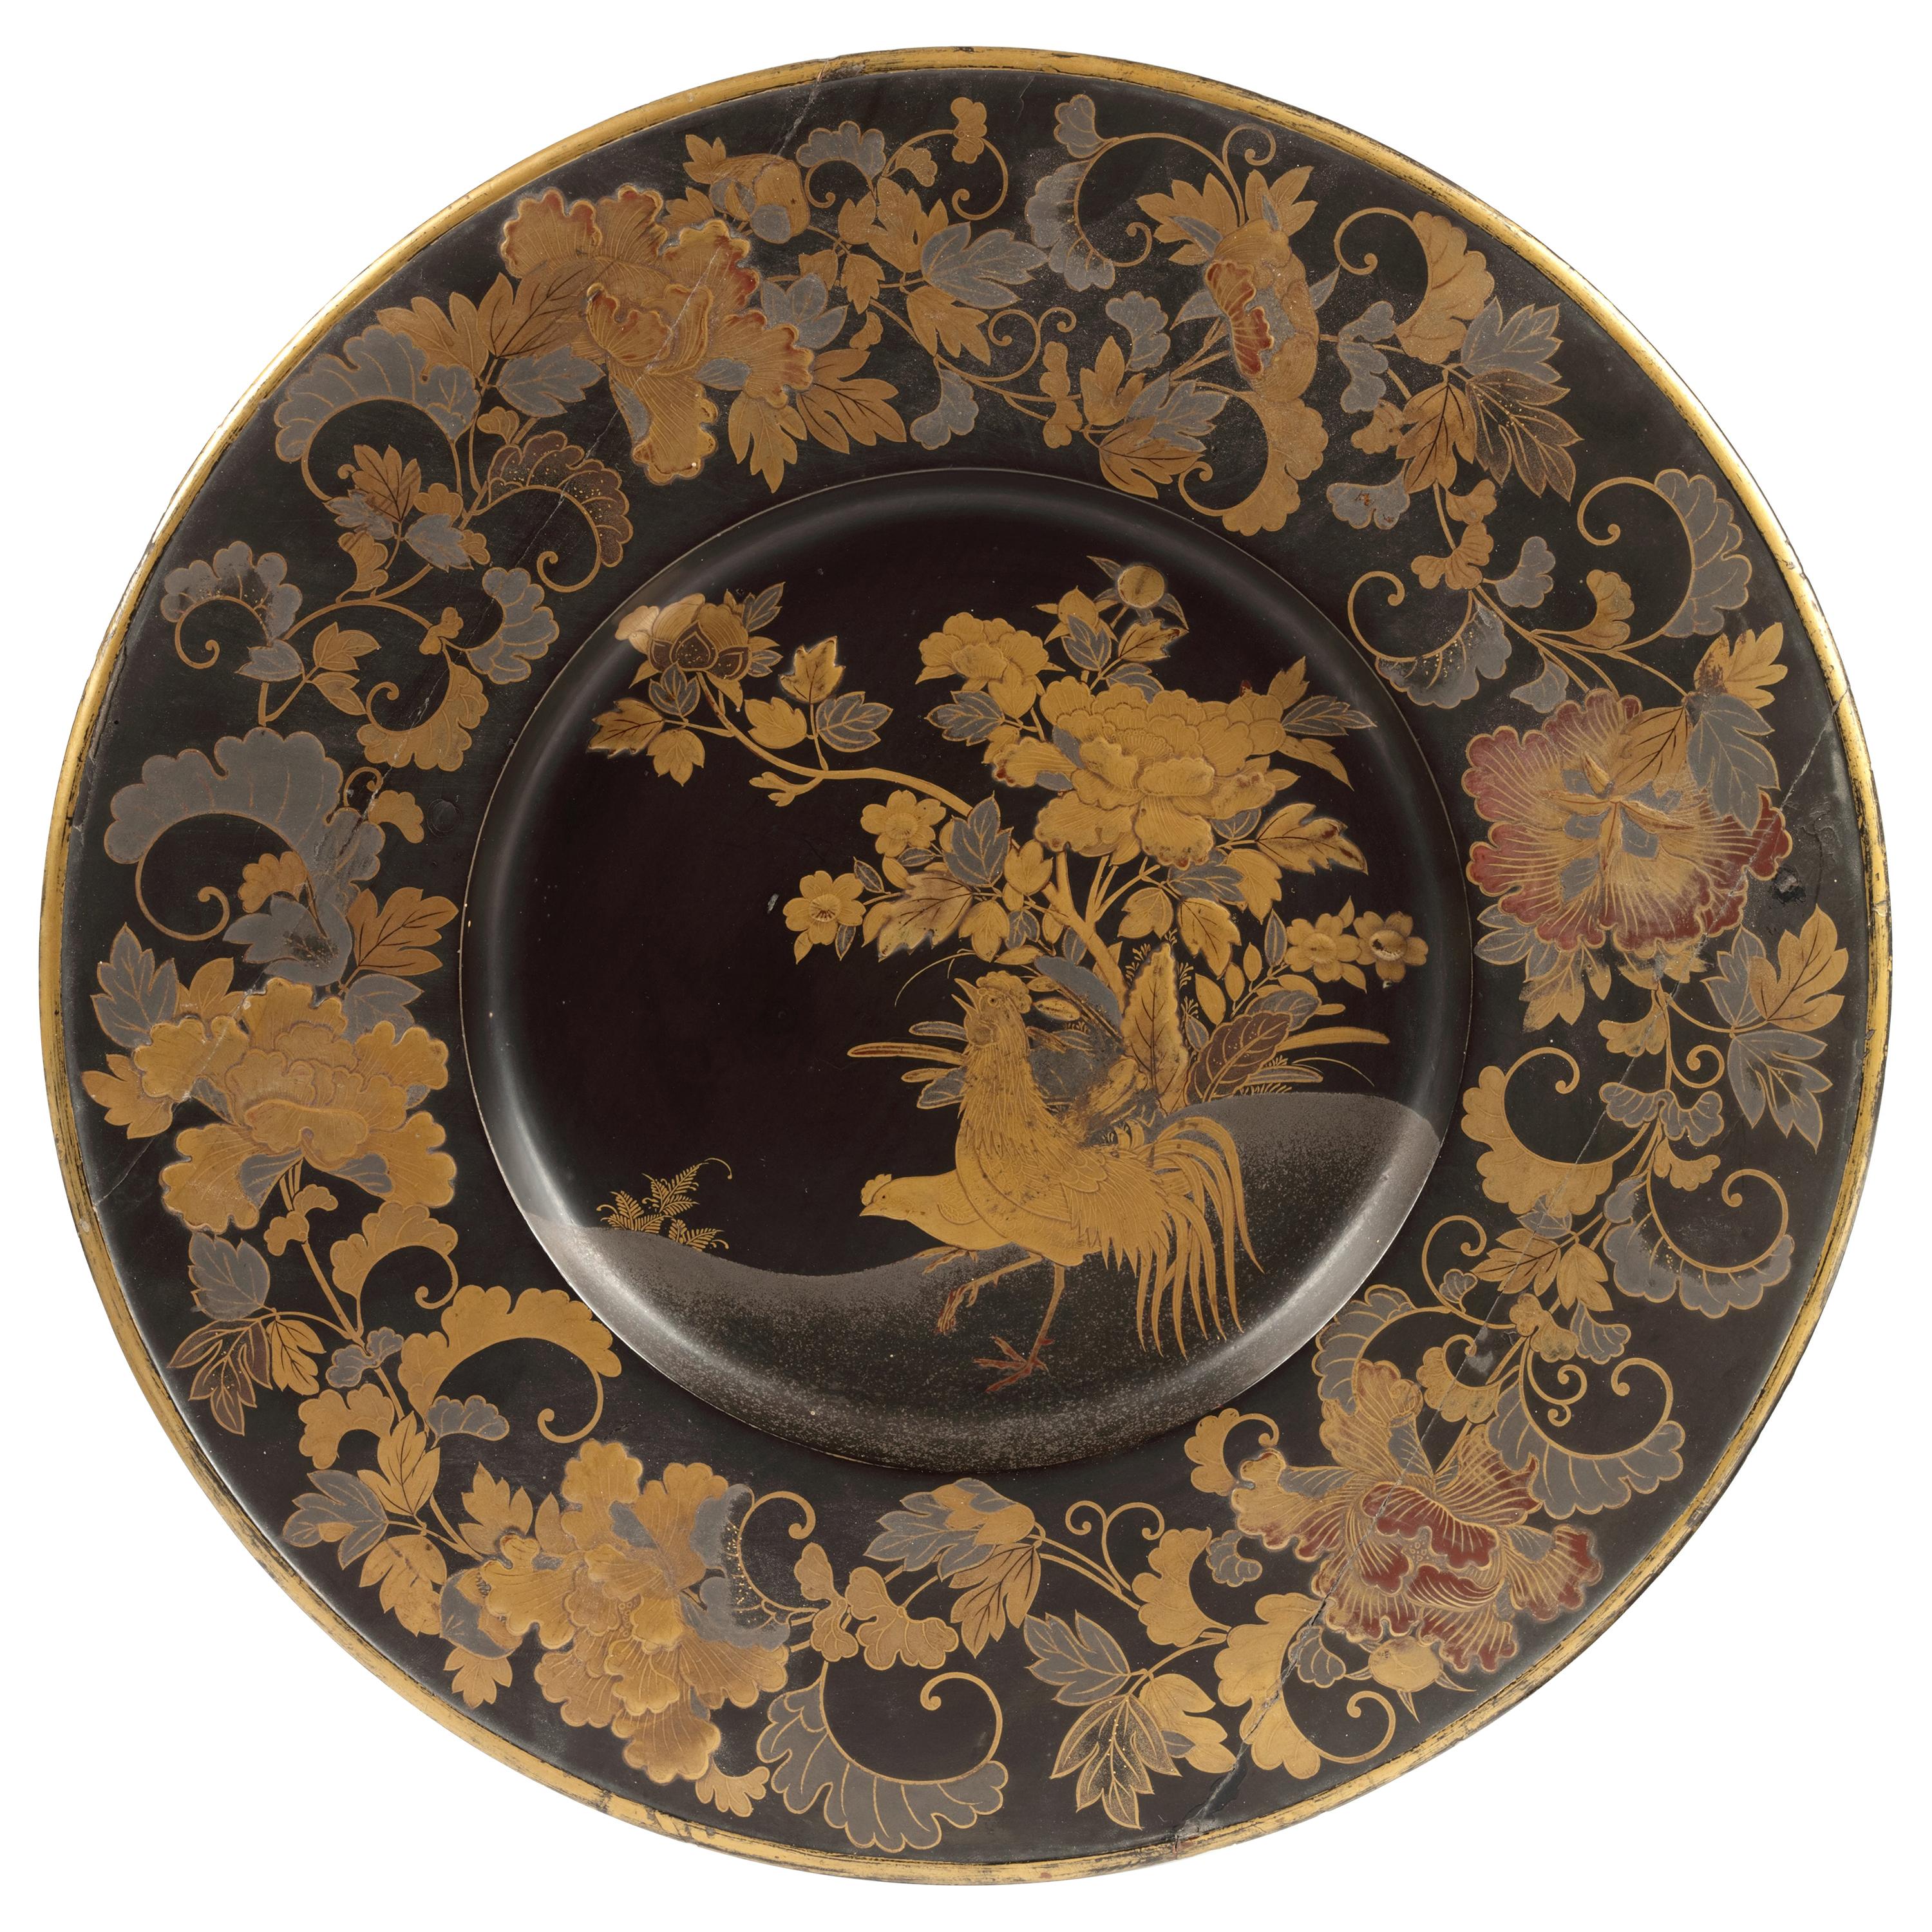 Fine 17th Century Japanese Export Black and Gold Lacquered Pictorial-Style Dish